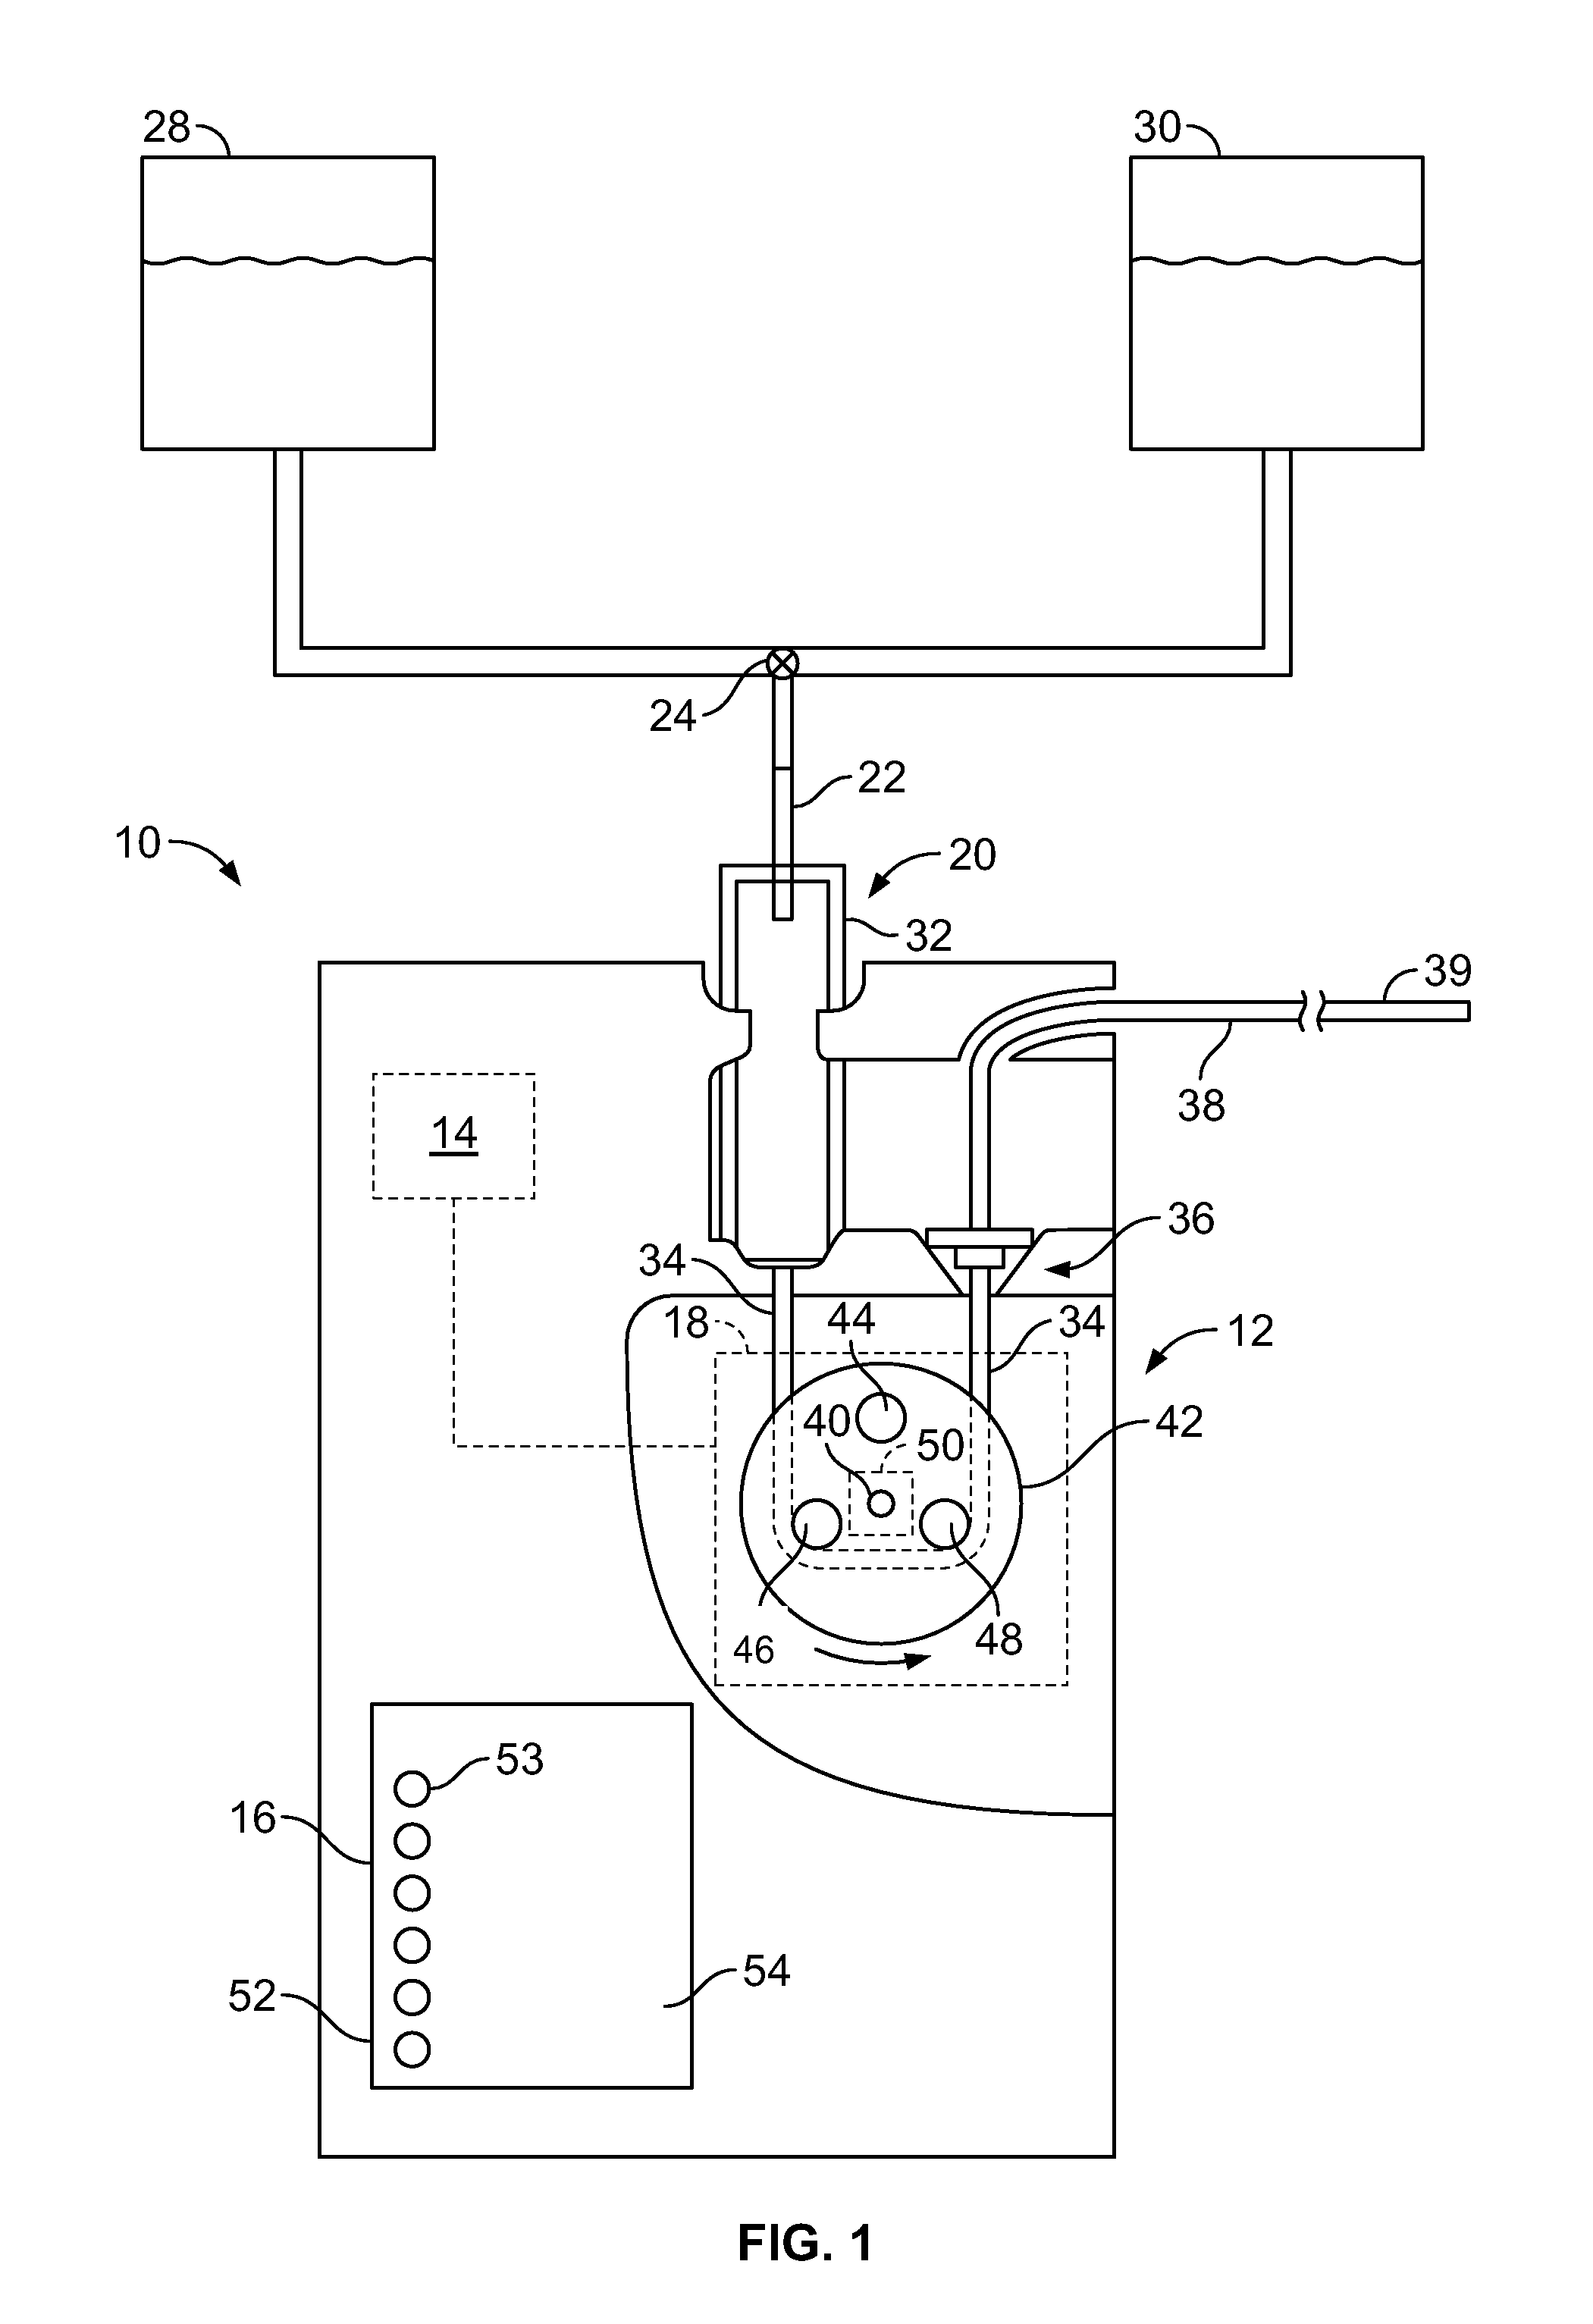 Enteral fluid delivery system and method for opeating the same